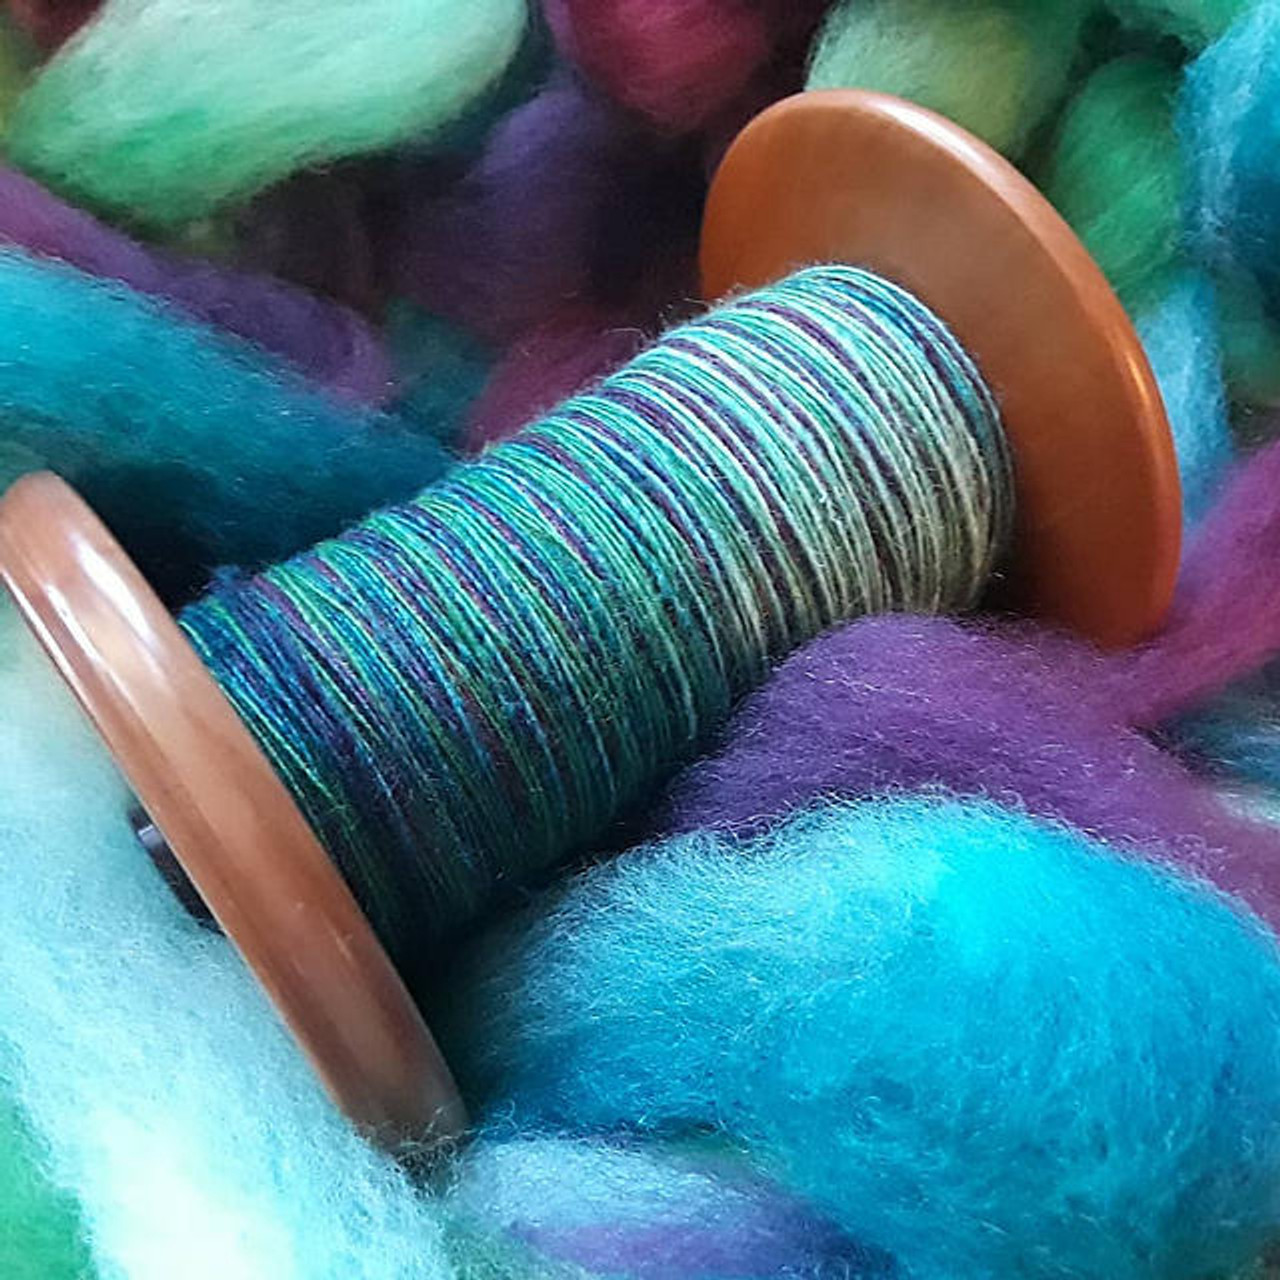 Spinning Yarns with a Purpose